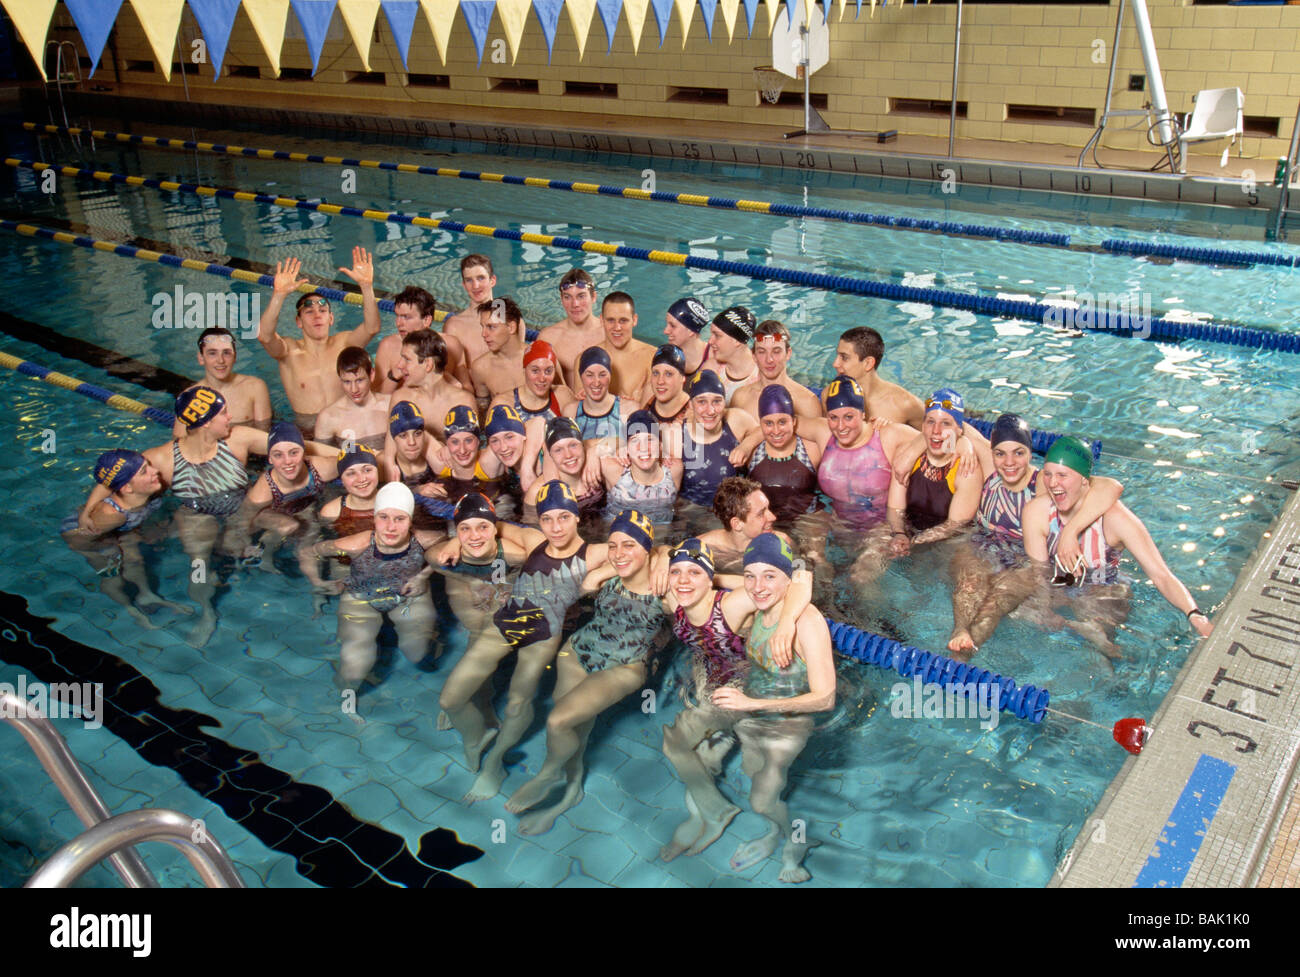 Group Portrait Of Teenage Boys And Girls On A High School Swim Team In The Swimming Pool Stock Photo Alamy